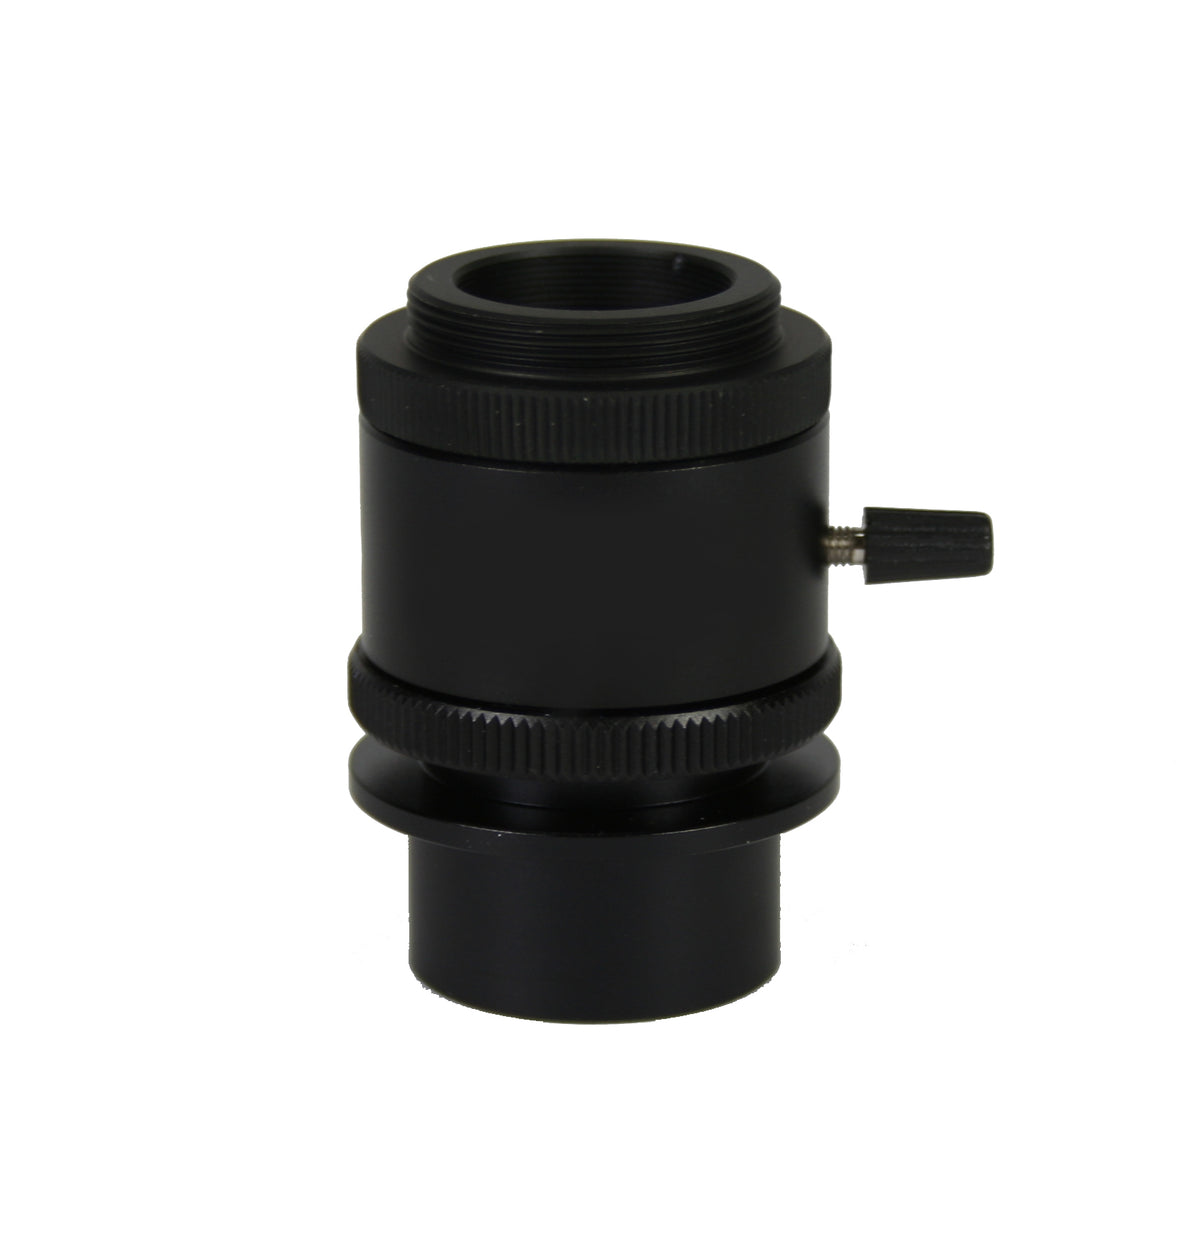 Video C-Mount Adapter with 0.5X Lens - 930-422